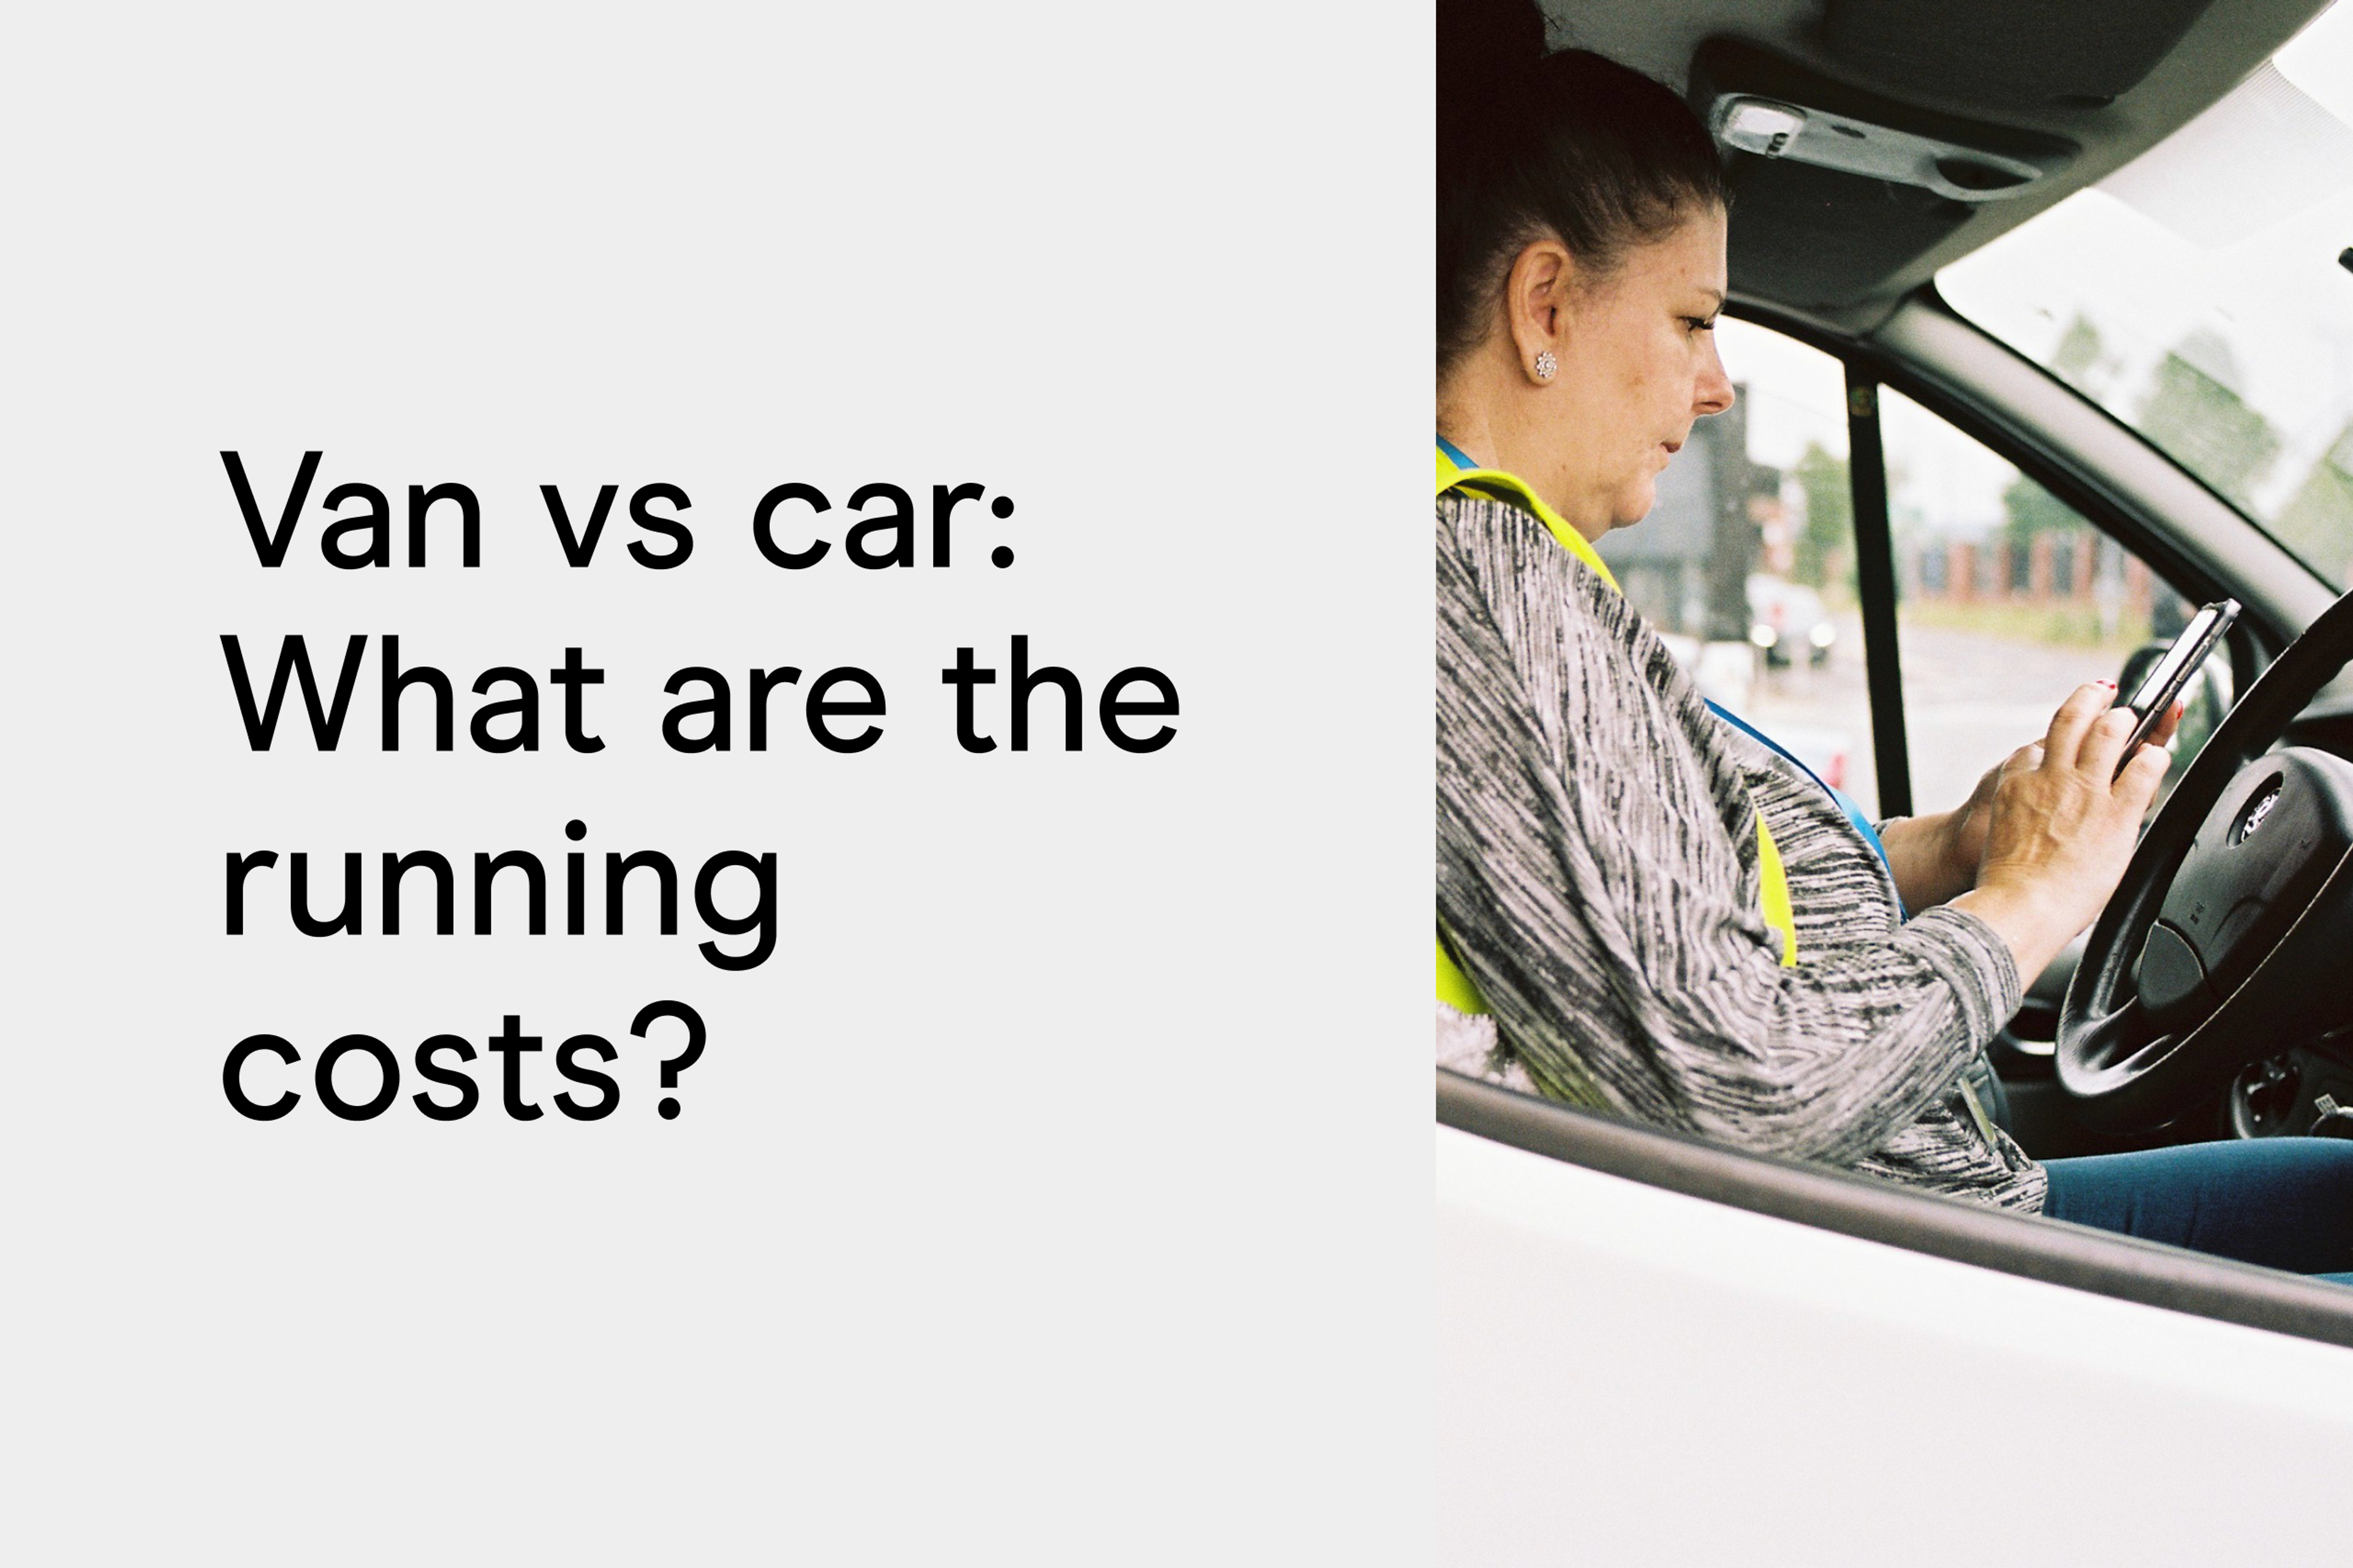 Van vs car: What are the running costs?